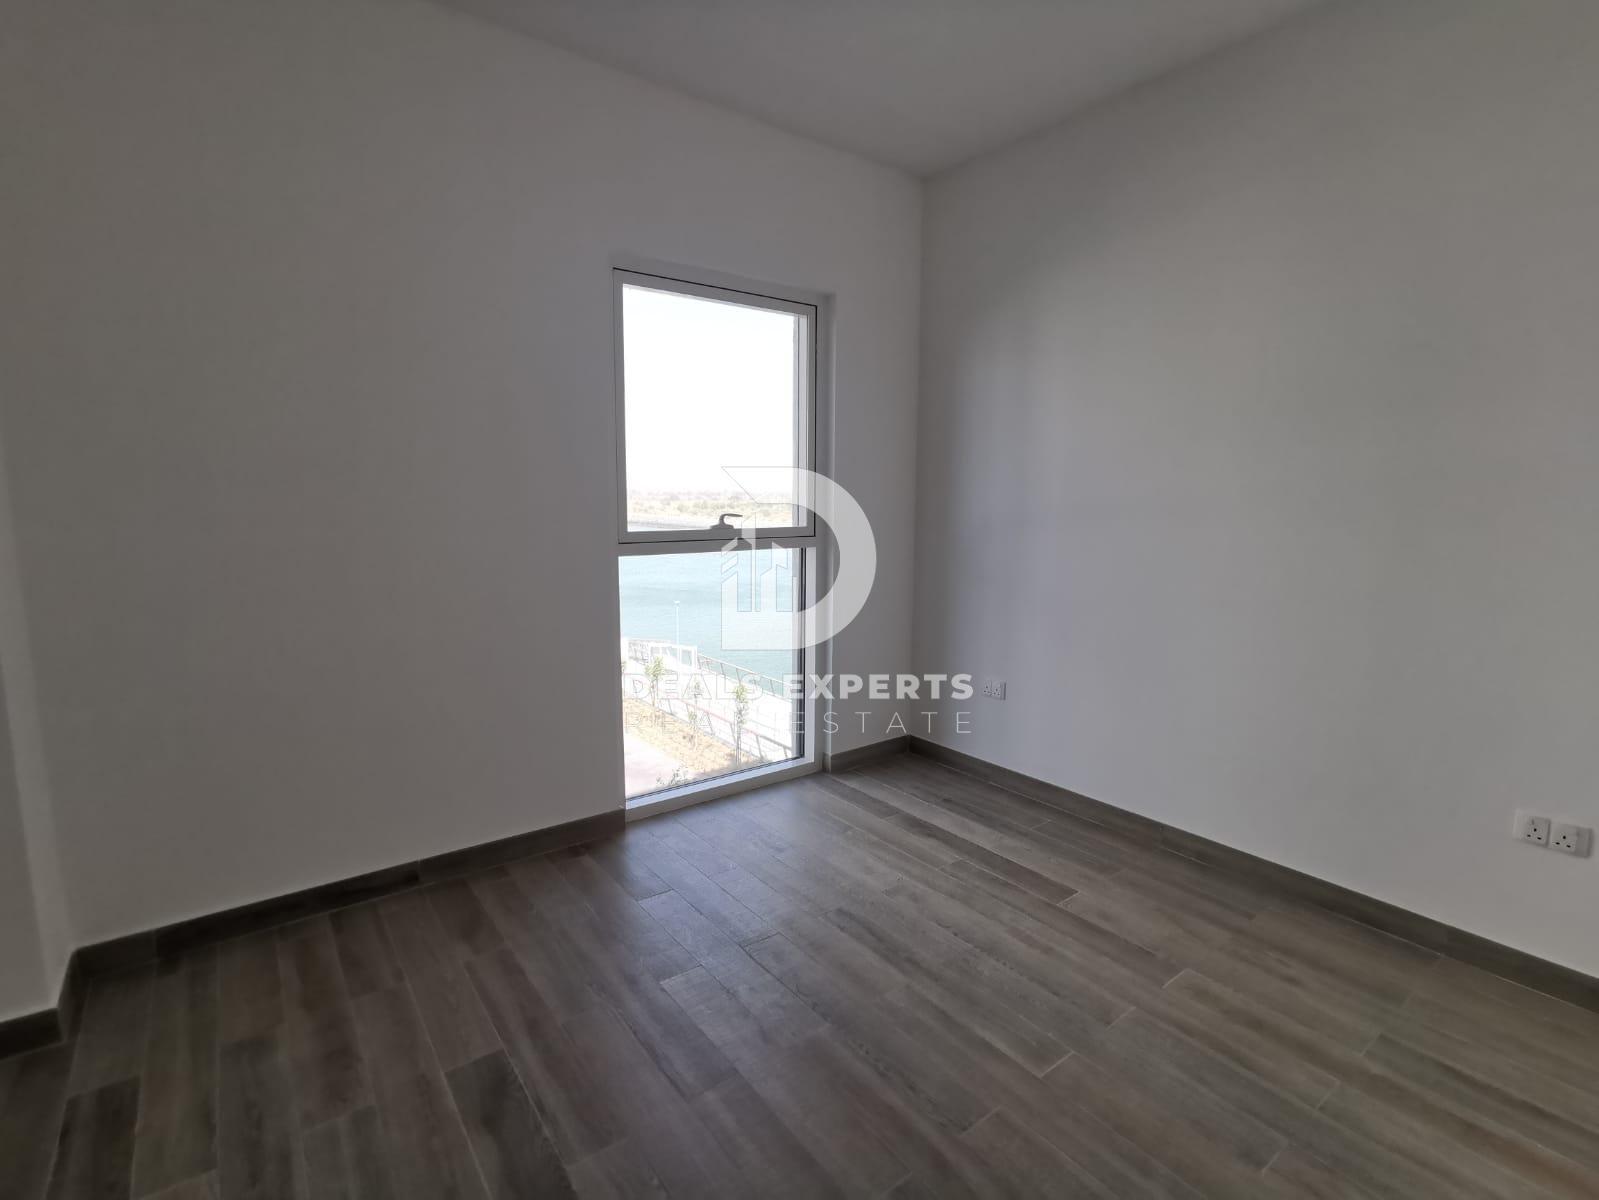 3 bed, 4 bath Apartment for rent in Waters Edge, Yas Island, Abu Dhabi for price AED 130000 yearly 